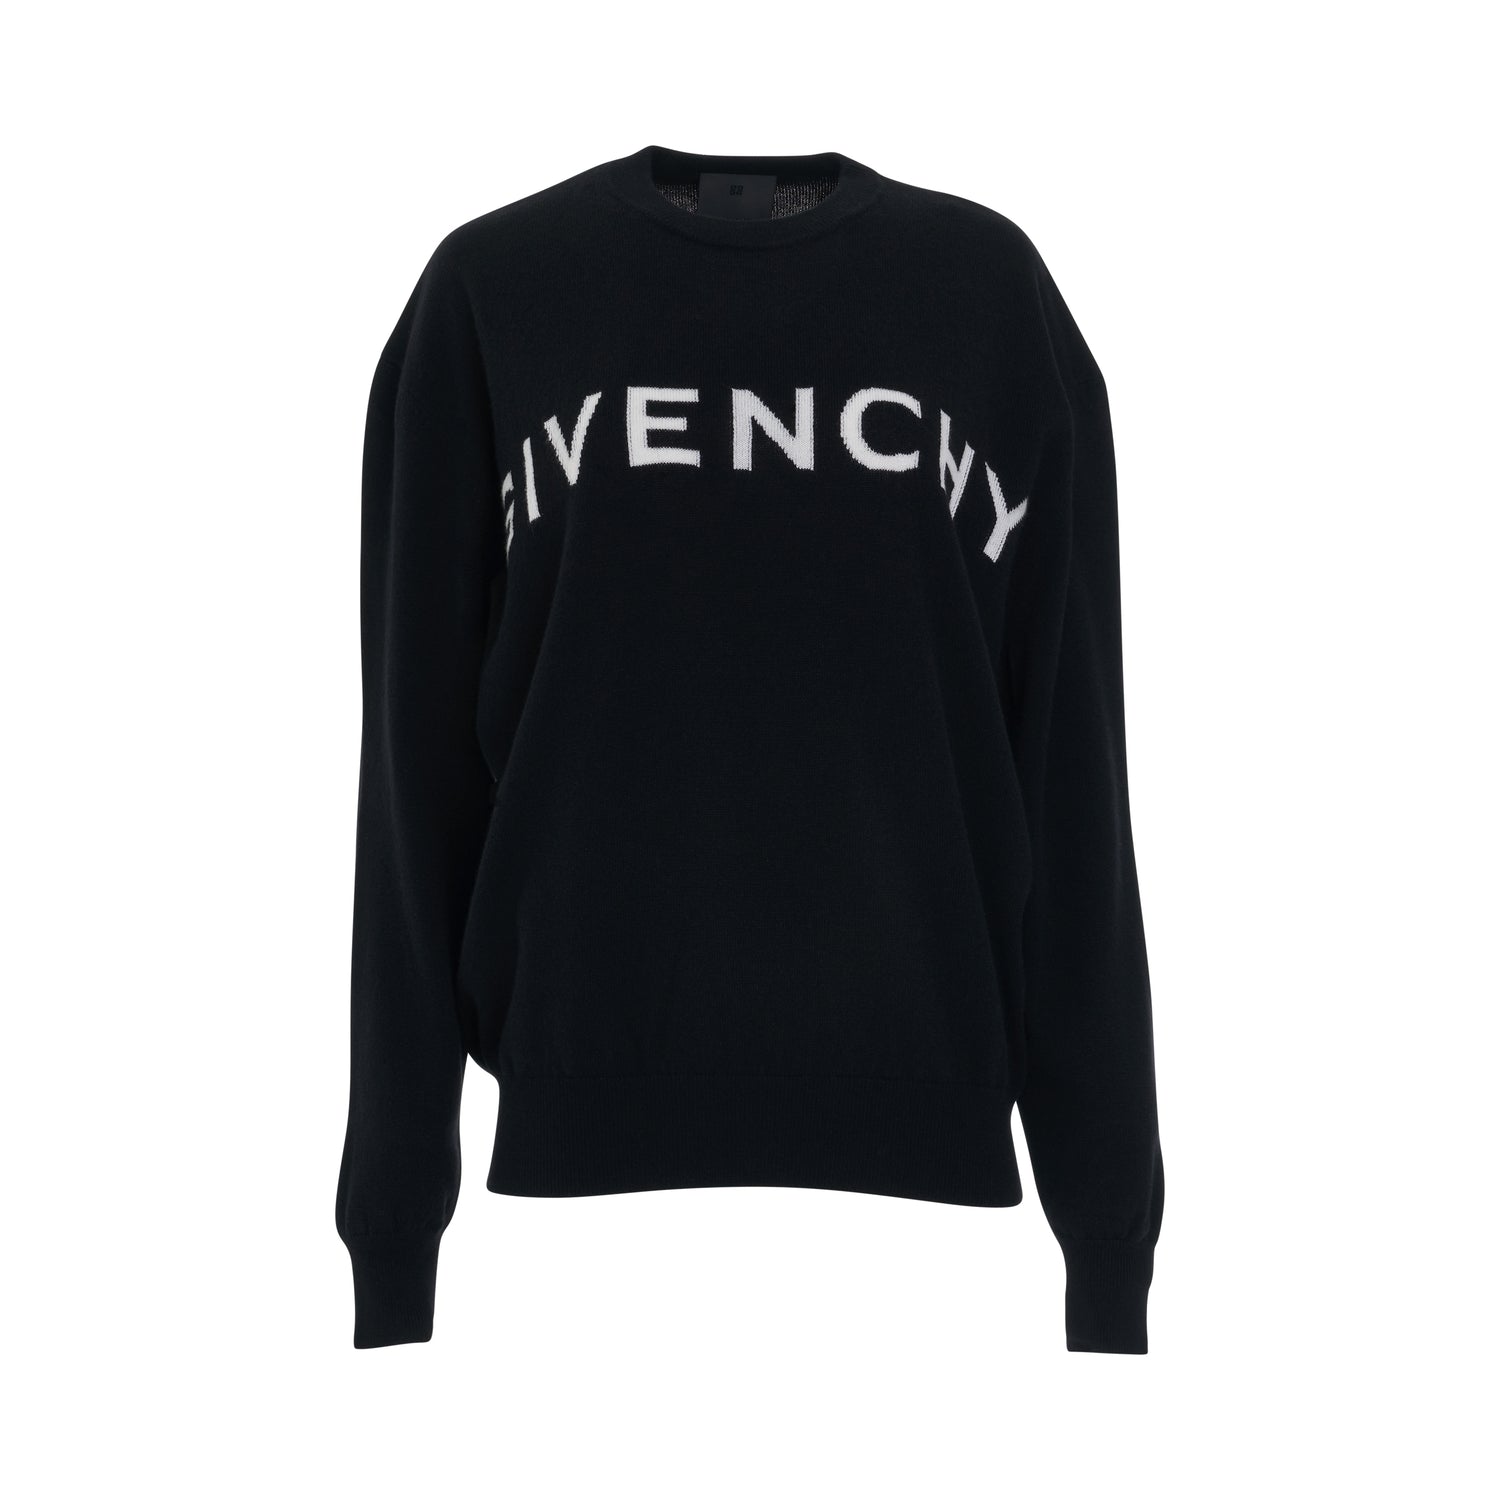 Givenchy Sale - Women Clothing